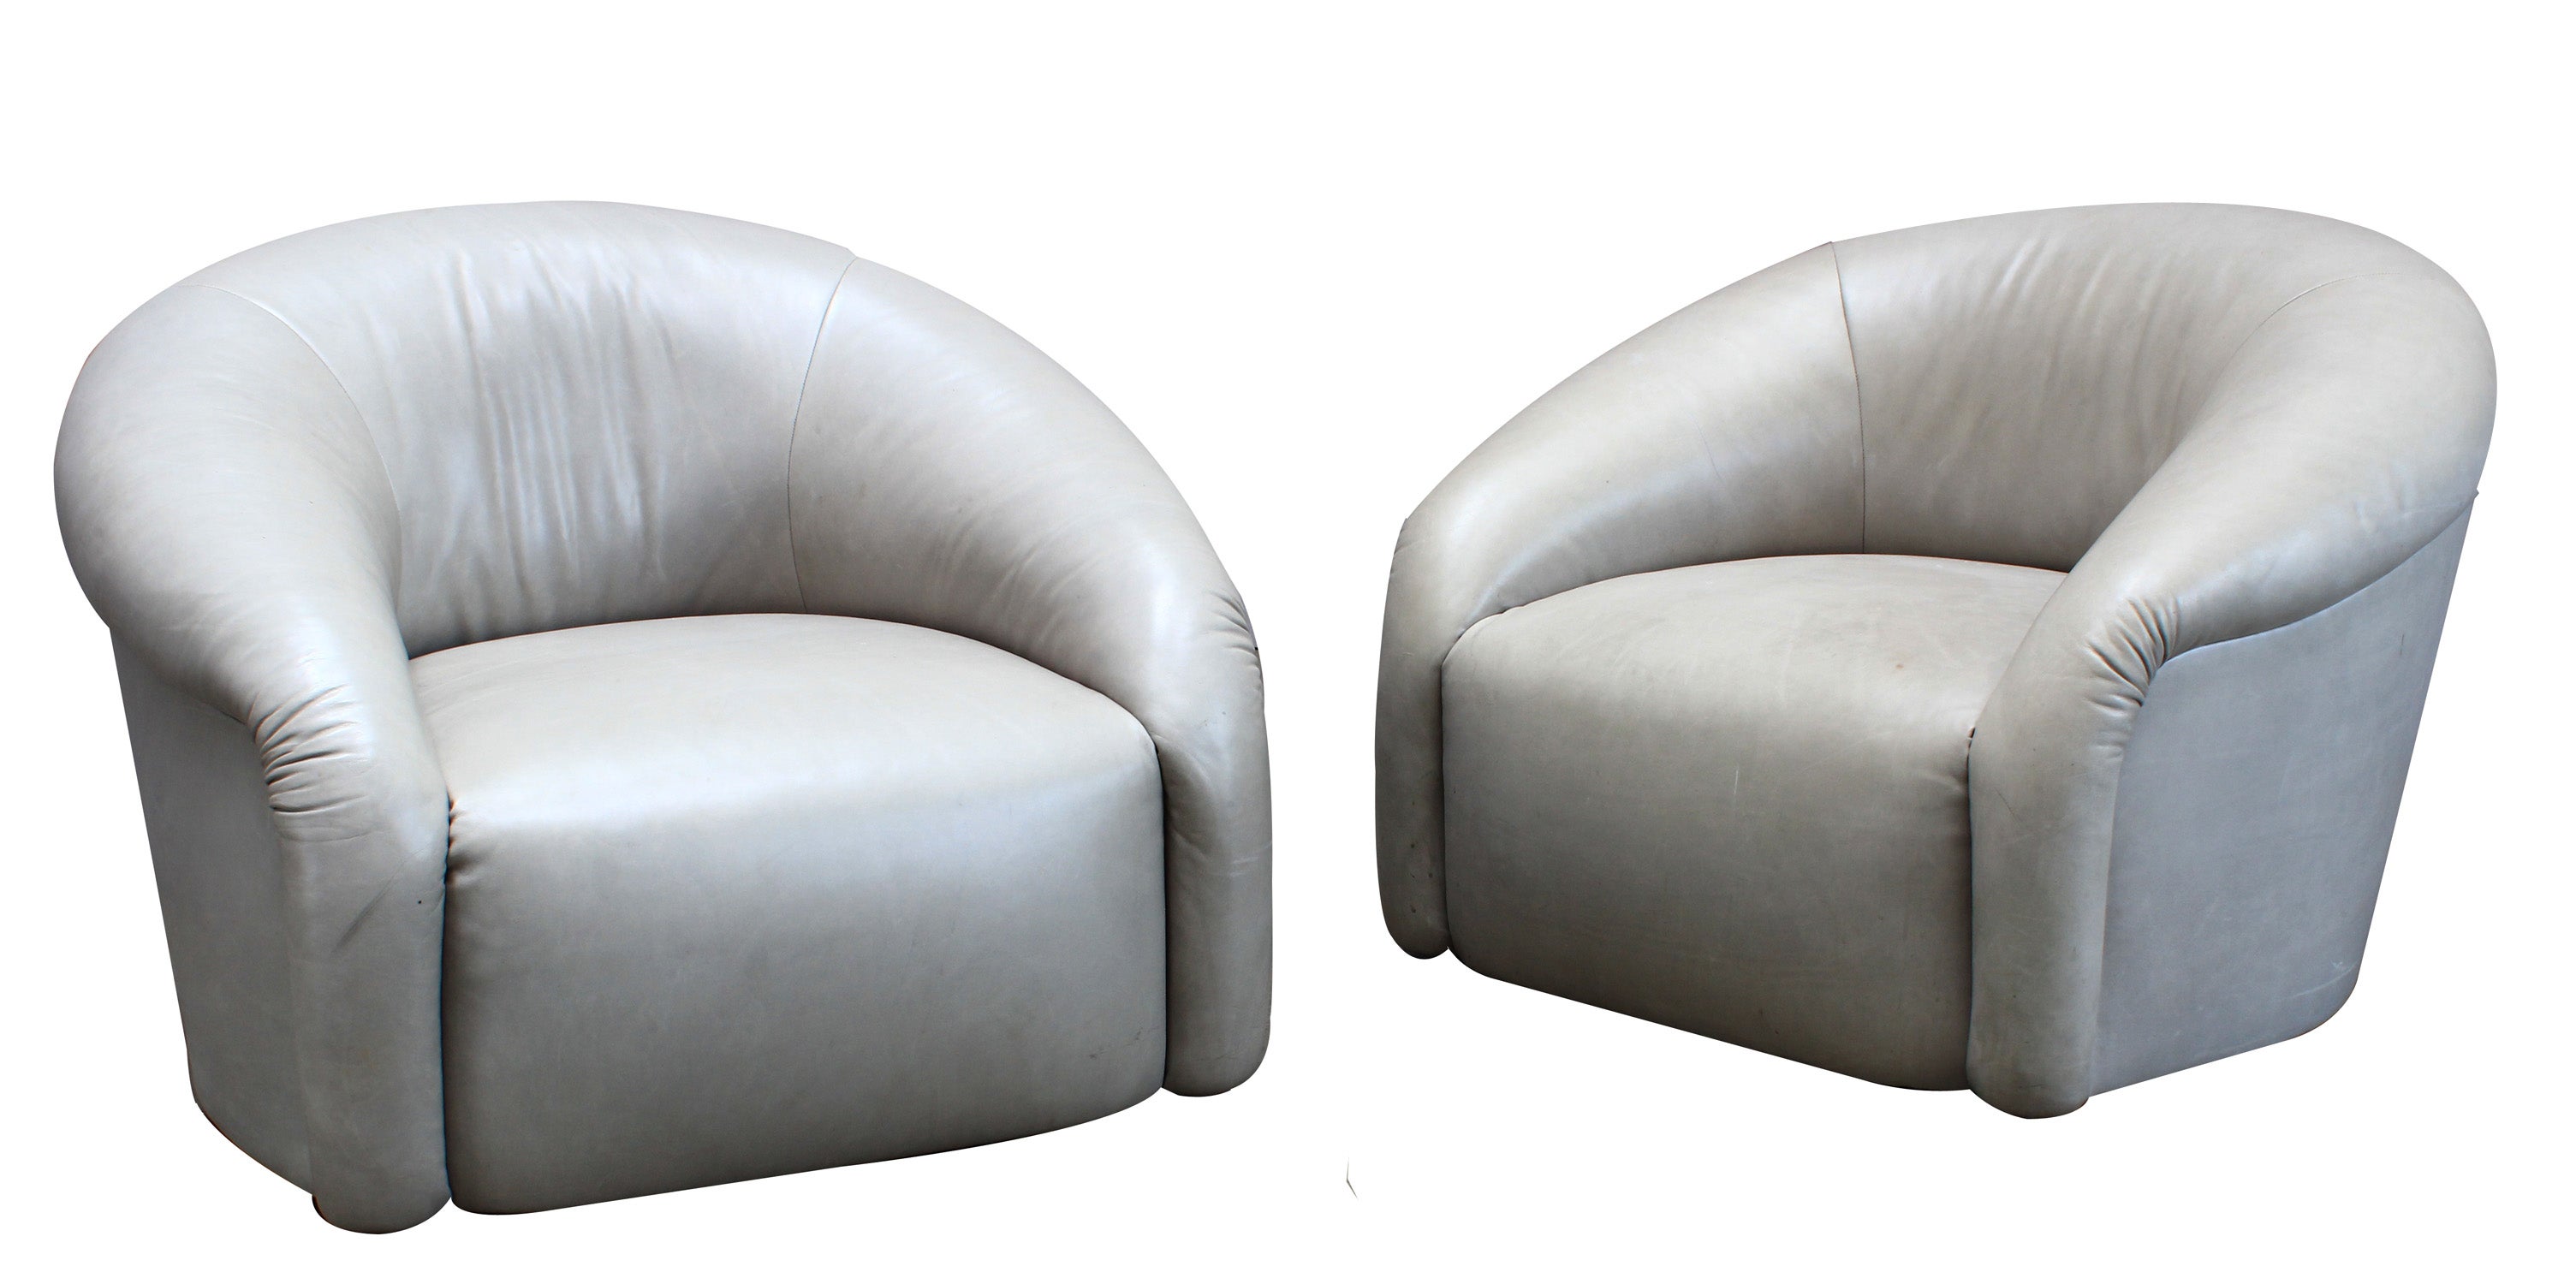 A Pair of 1970s Barrel Back Swivel Club Chairs